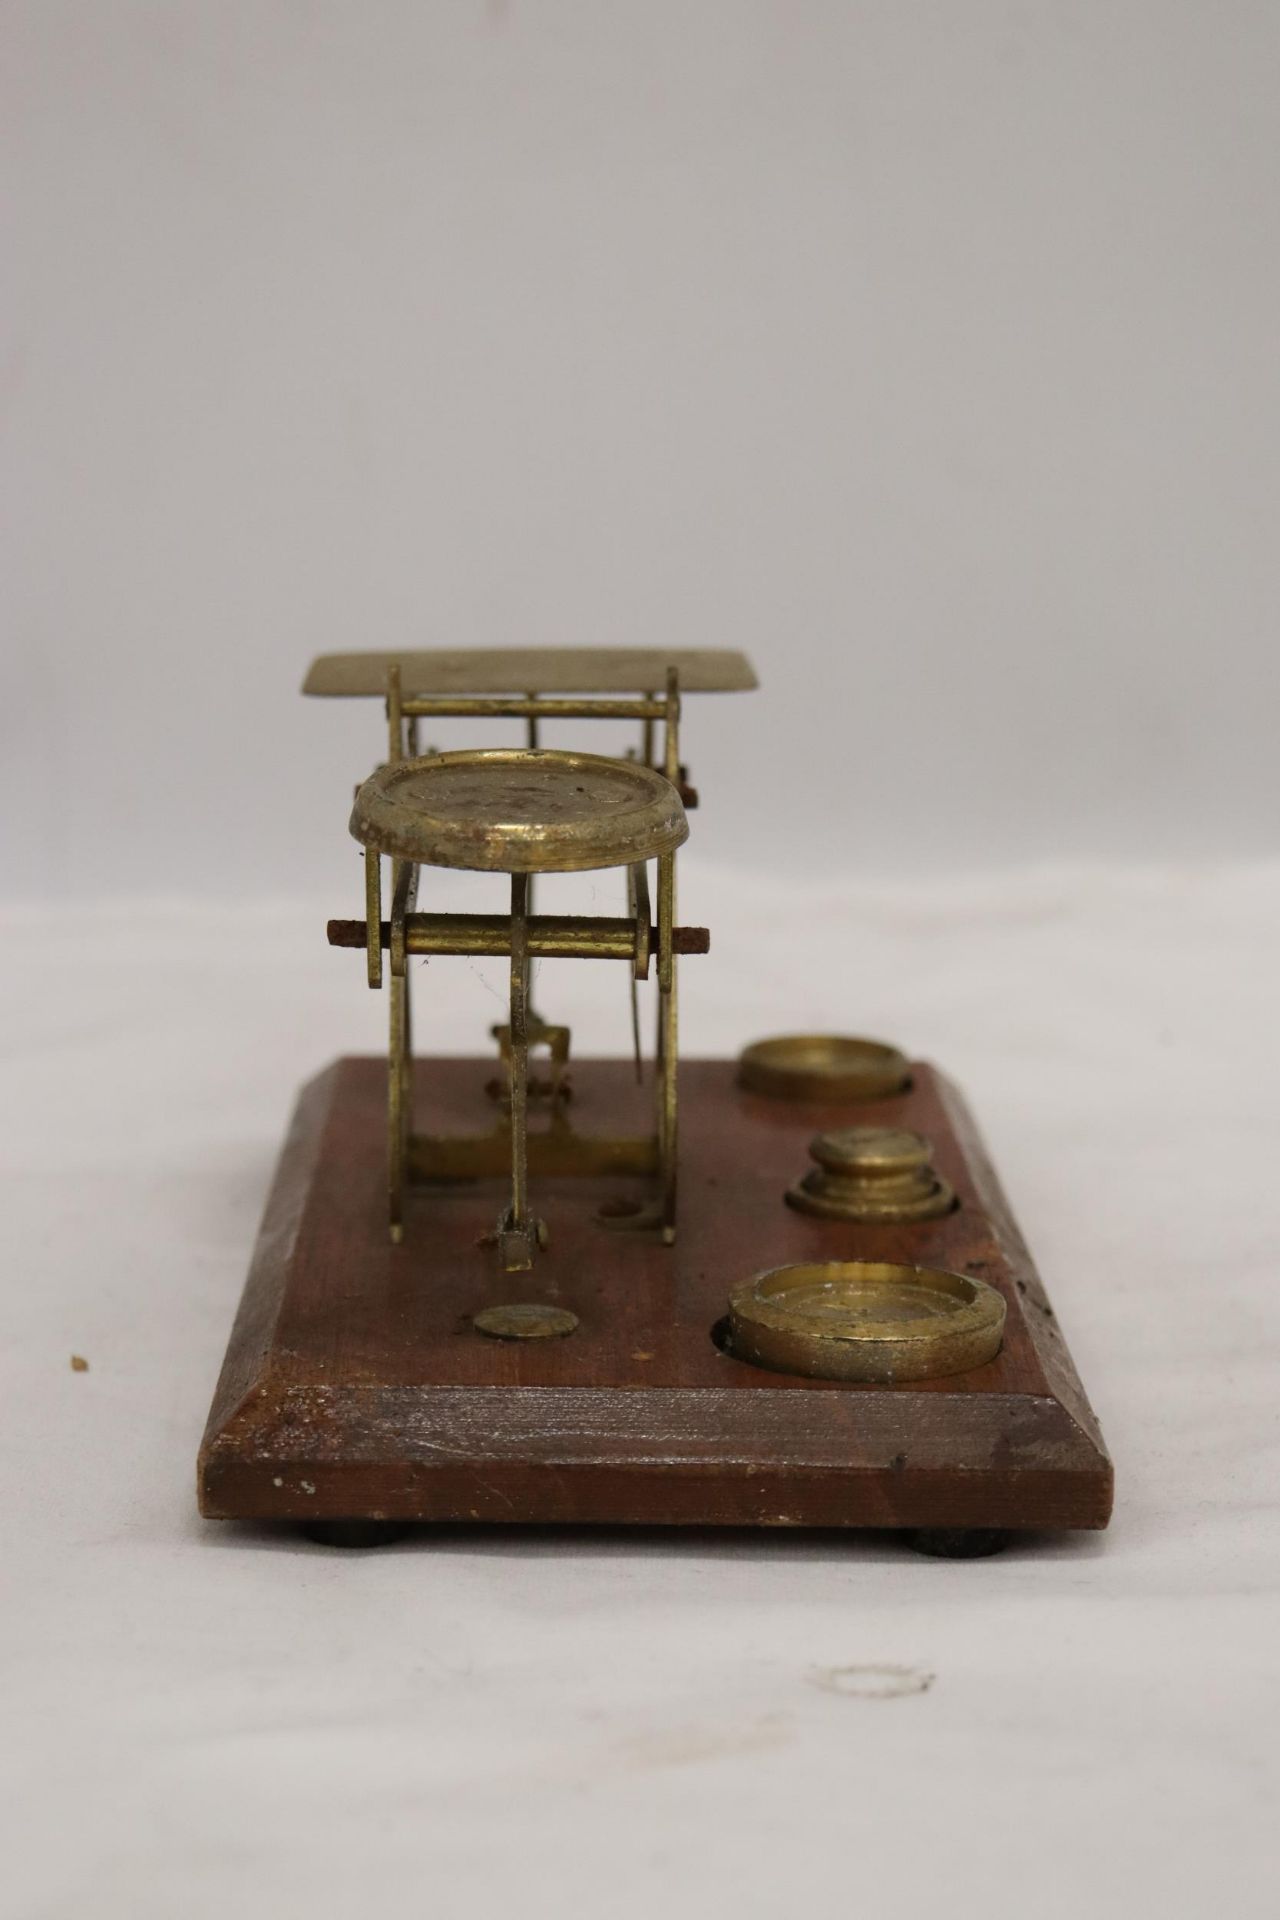 AN ANTIQUE POSTAL SCALE BRASS AND WOOD BASE - Image 2 of 7